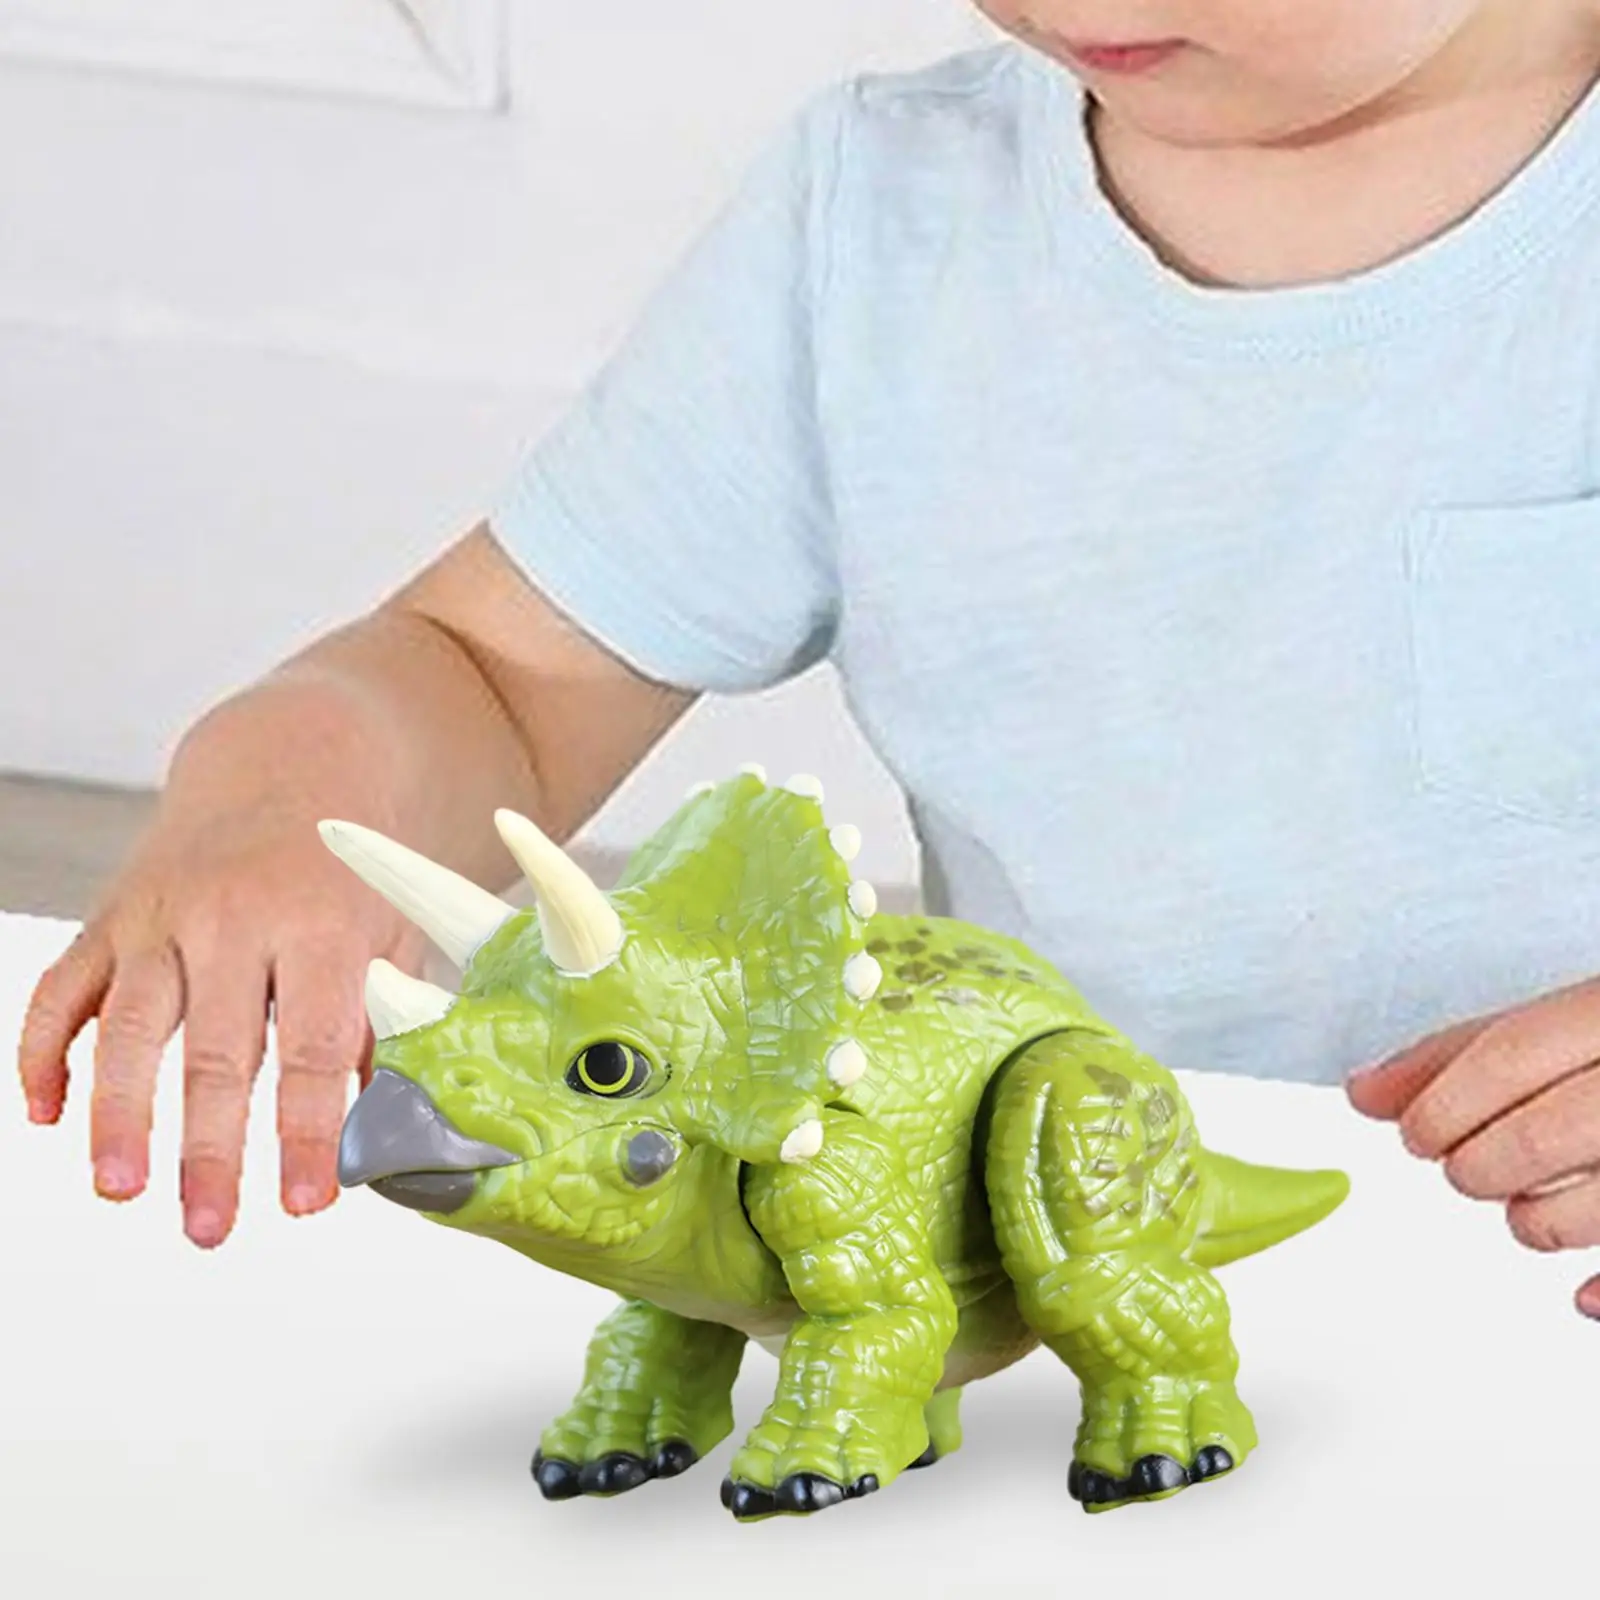 Dinosaur Figure Toy Simulated Dinosaur Toy for Cake Topper Gift